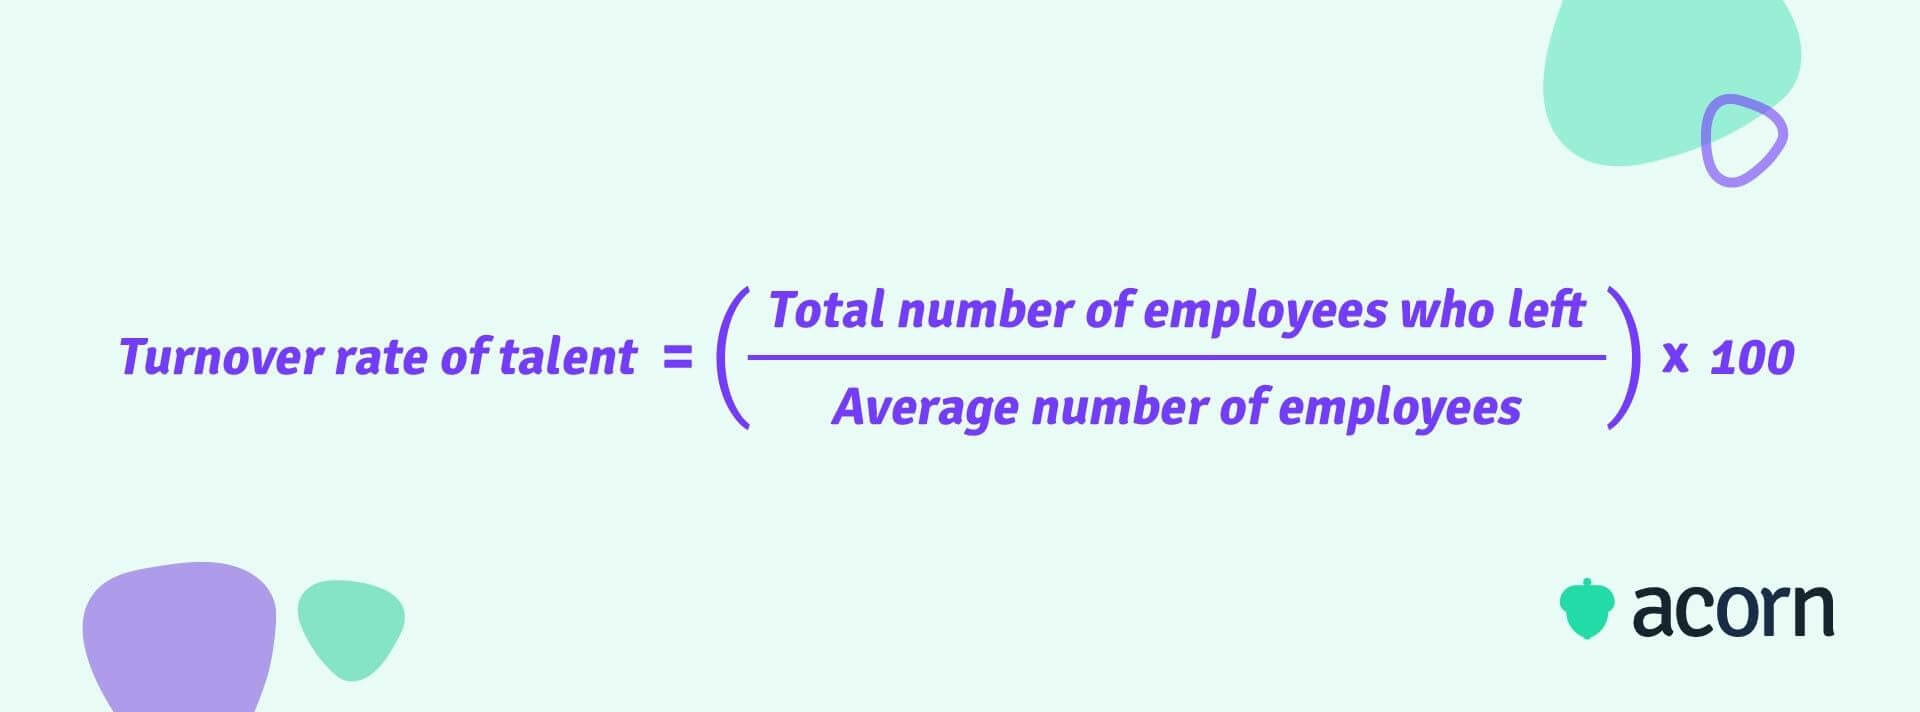 The turnover rate of talent = (total number of employees who left/average number of employees) x 100